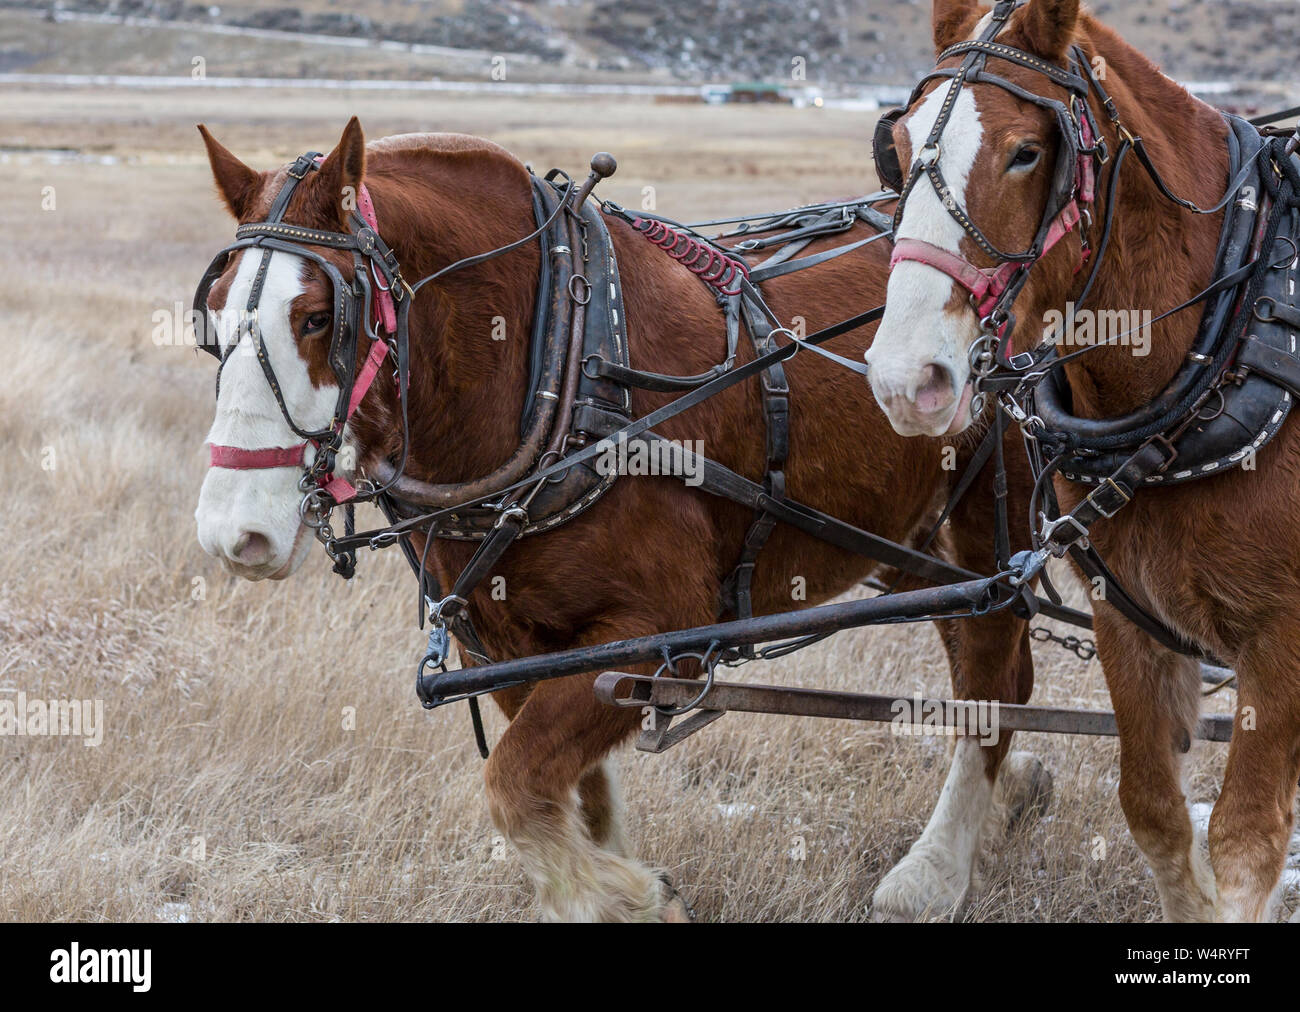 Two brown Tennessee Walker horses pulling a wagon in a field, Wyoming, United States Stock Photo